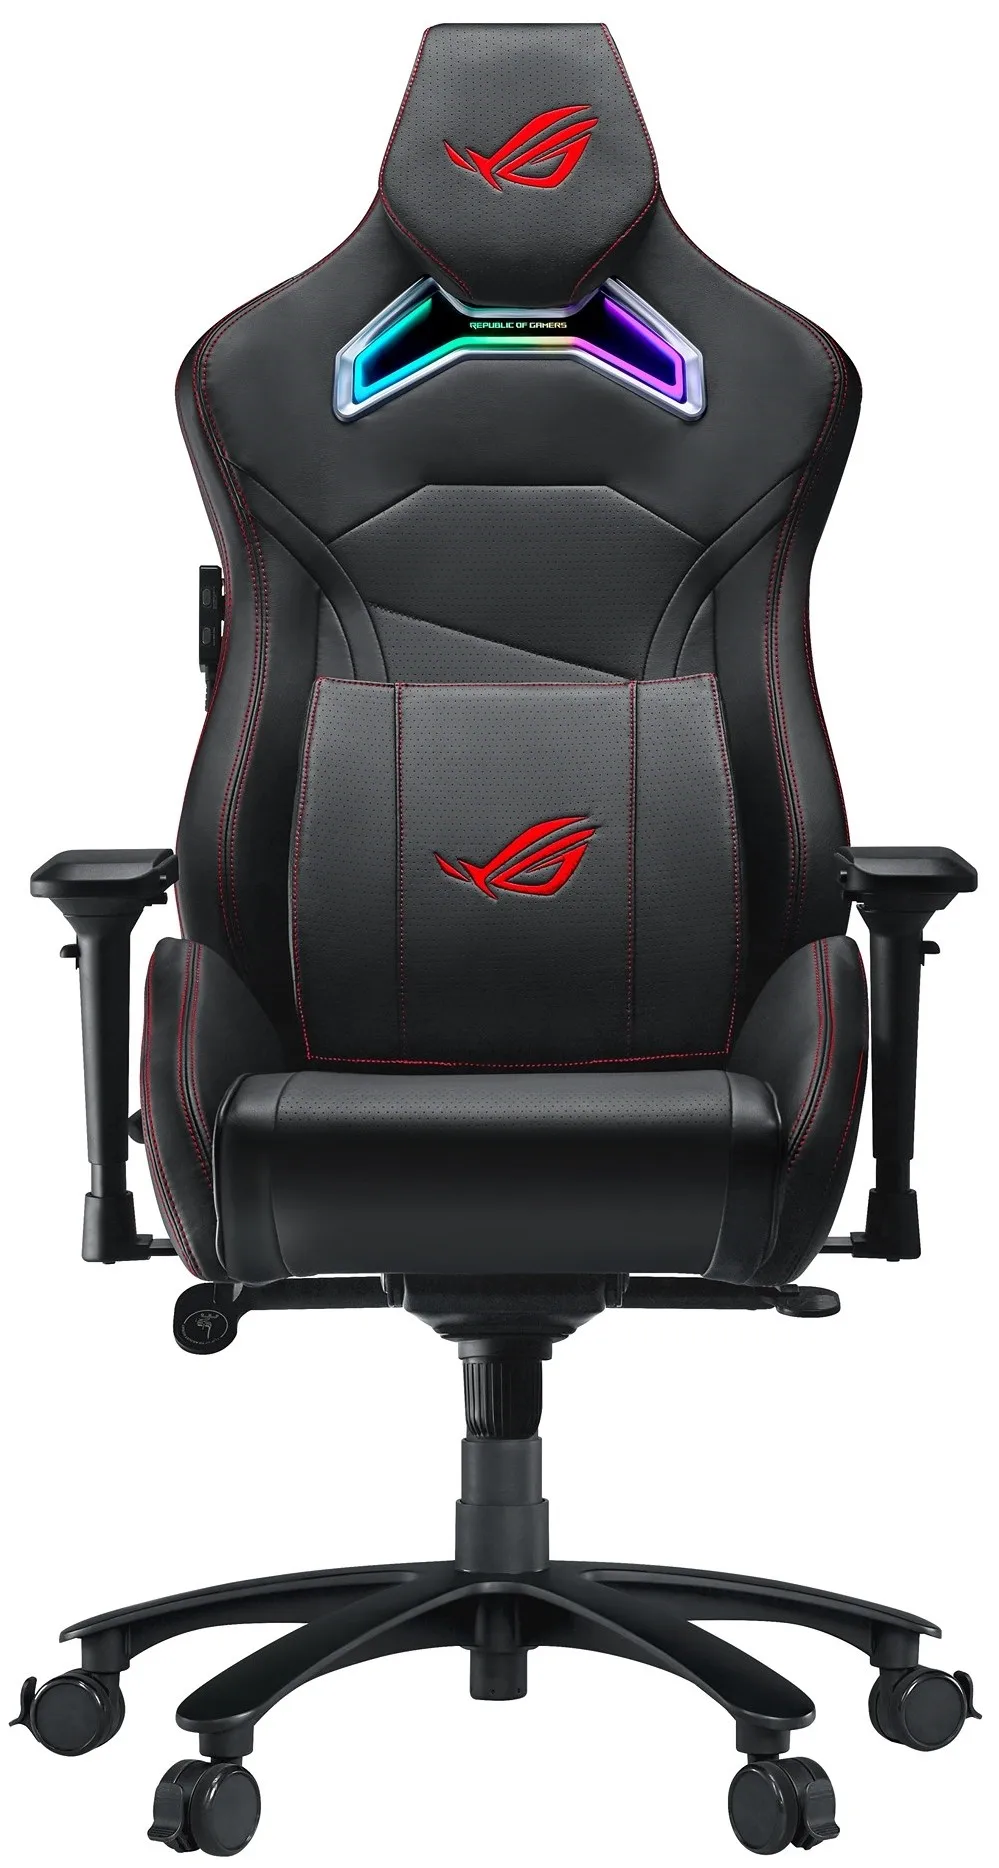 Office Chairs Asus Game Chair Rog Chariot Rgb 90gc00e0 Msg010 For Gamer Gamers Aliexpress